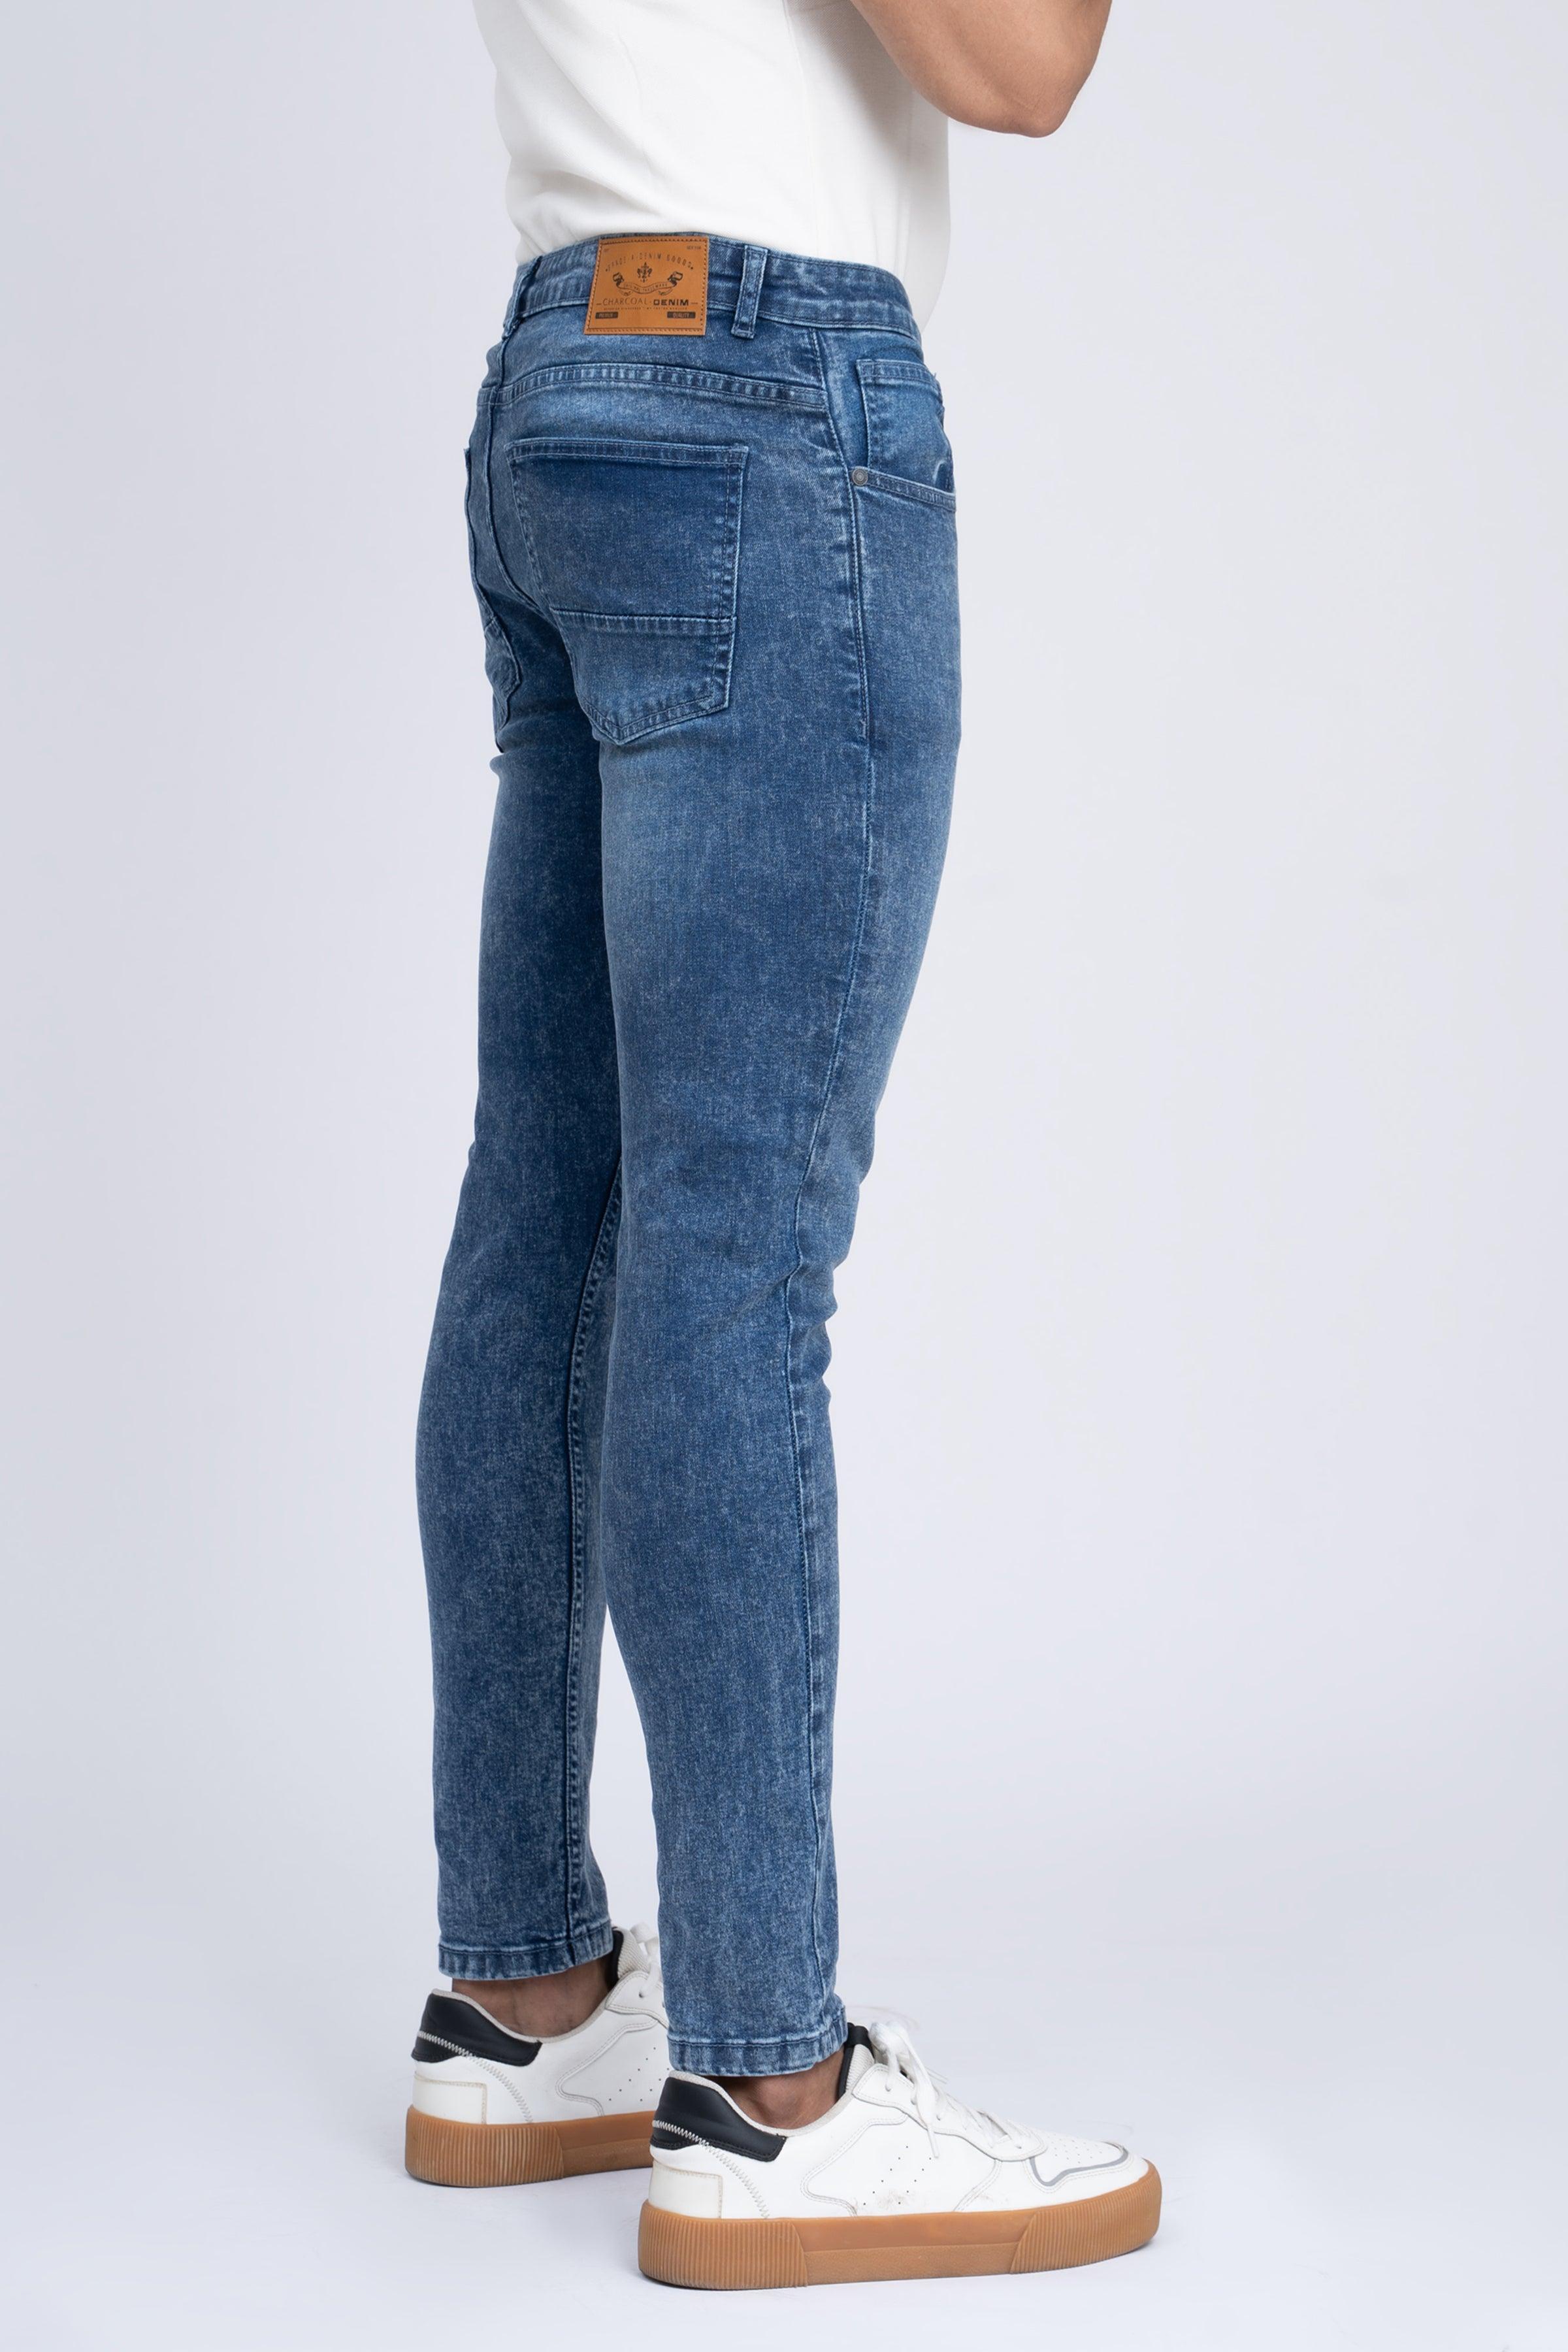 JEAN SKINYY LEG MID BLUE at Charcoal Clothing